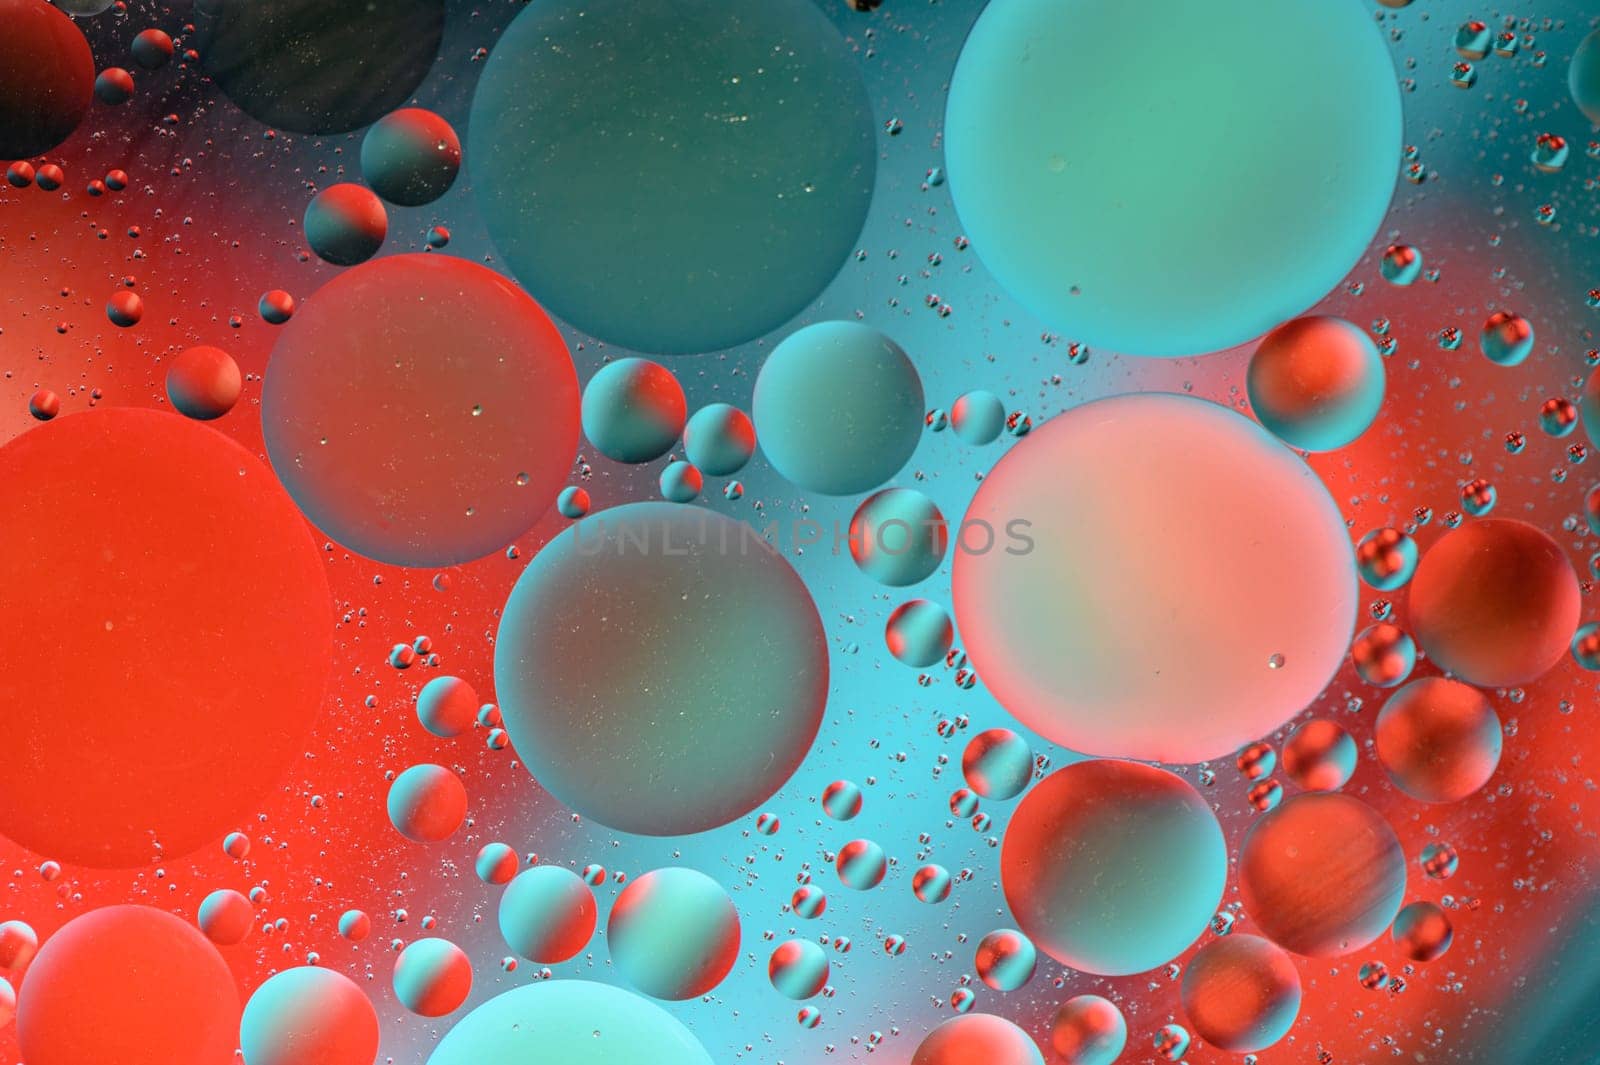 abstract background of multi-colored spots and circles microcosm universe galaxy 7 by Mixa74